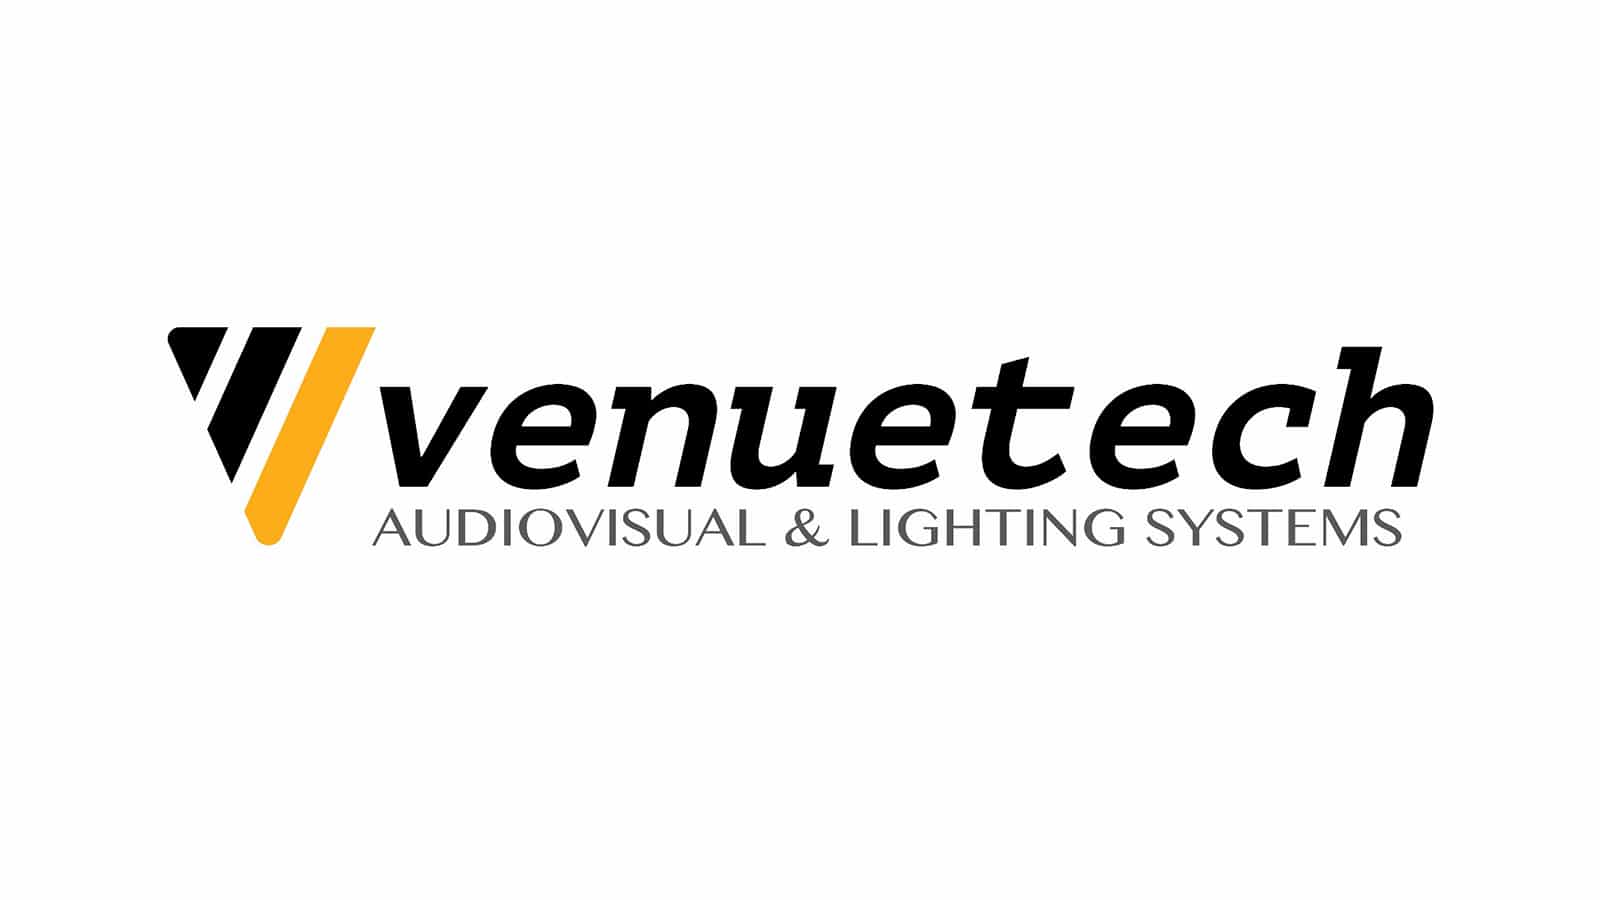 Venuetech Named as Meyer Sound’s Primary Middle Eastern Distributor